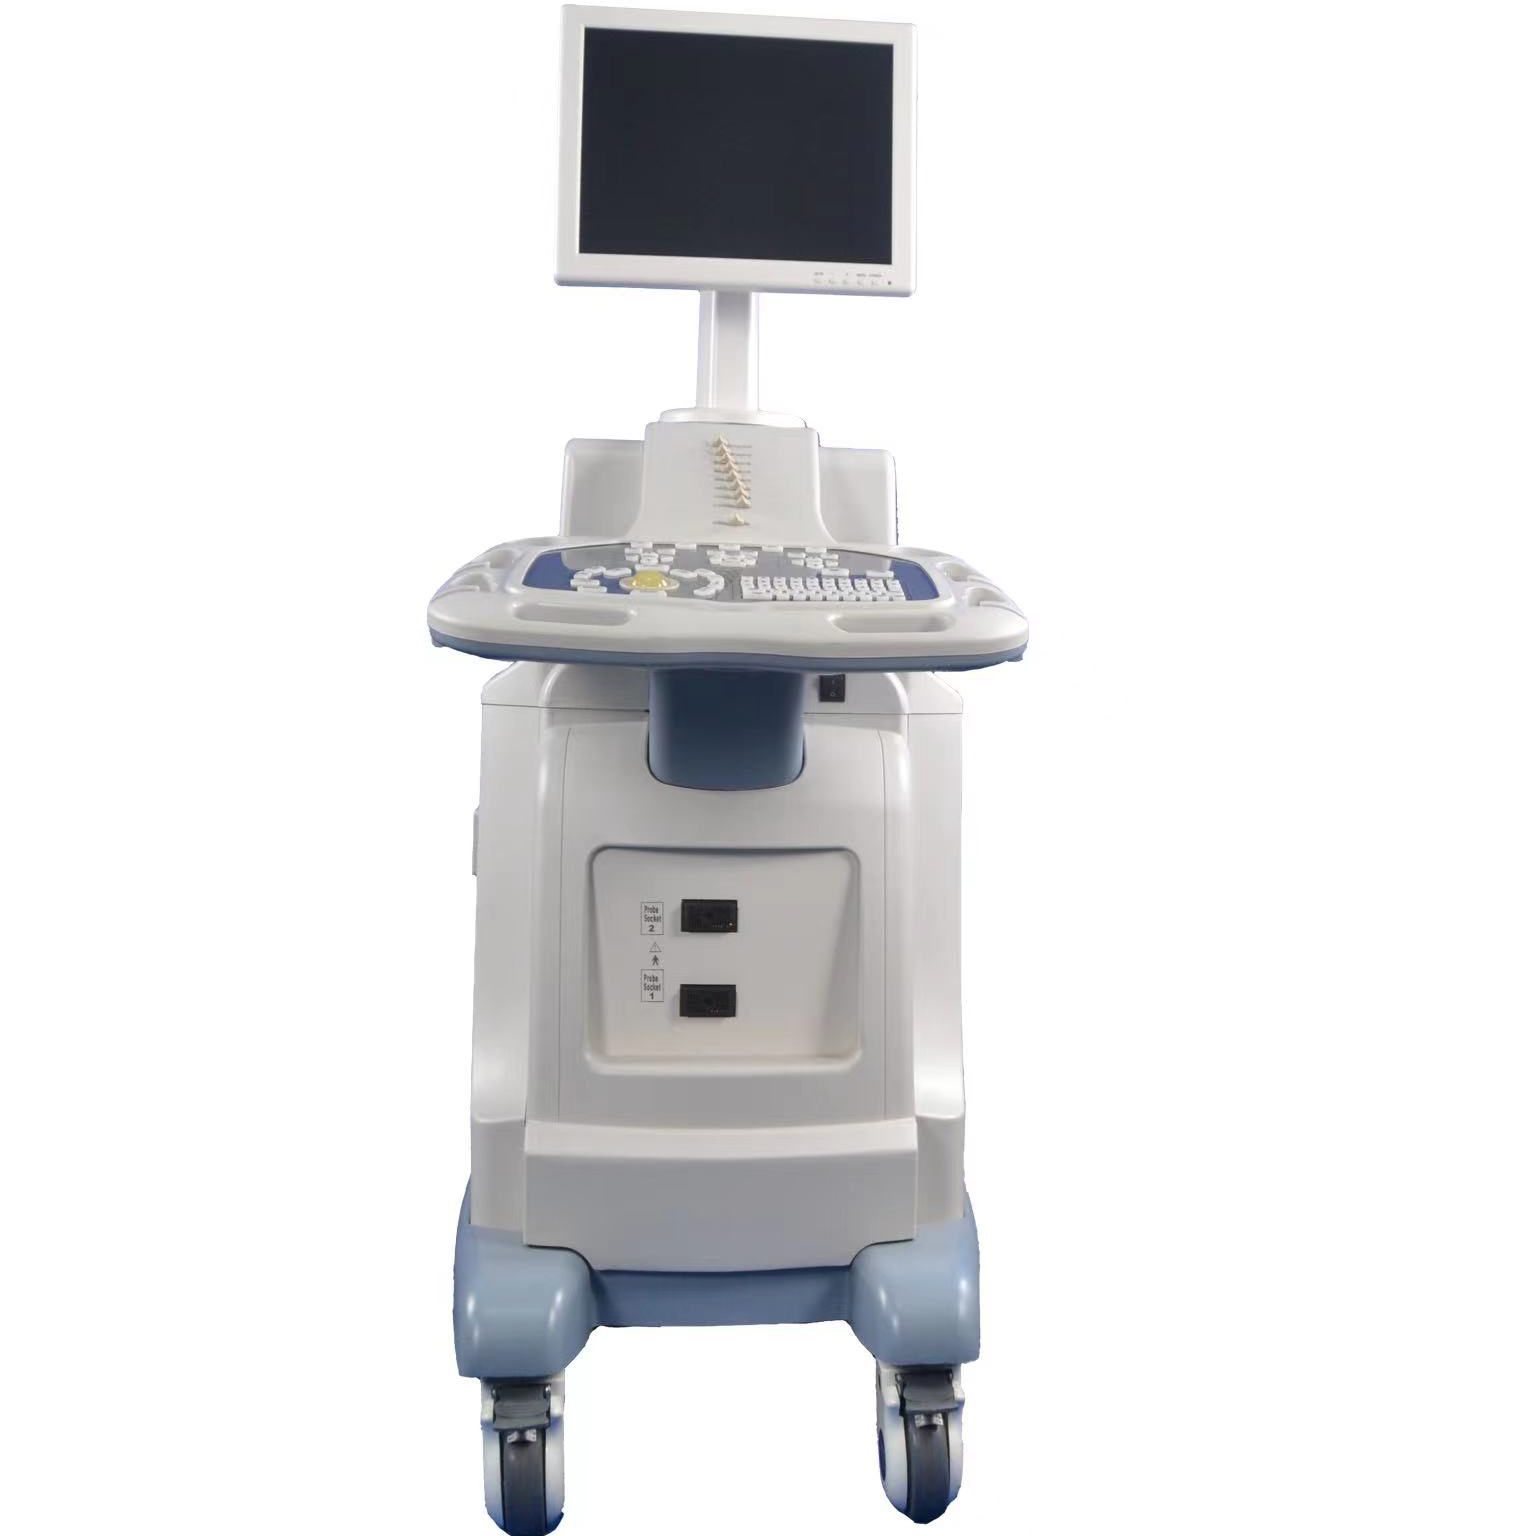 Amain OEM/ODM Lower and Discount Price Of Cosmos C20 Trolley Ultrasound Scanner for liver kidney bladder fetal diagnosis